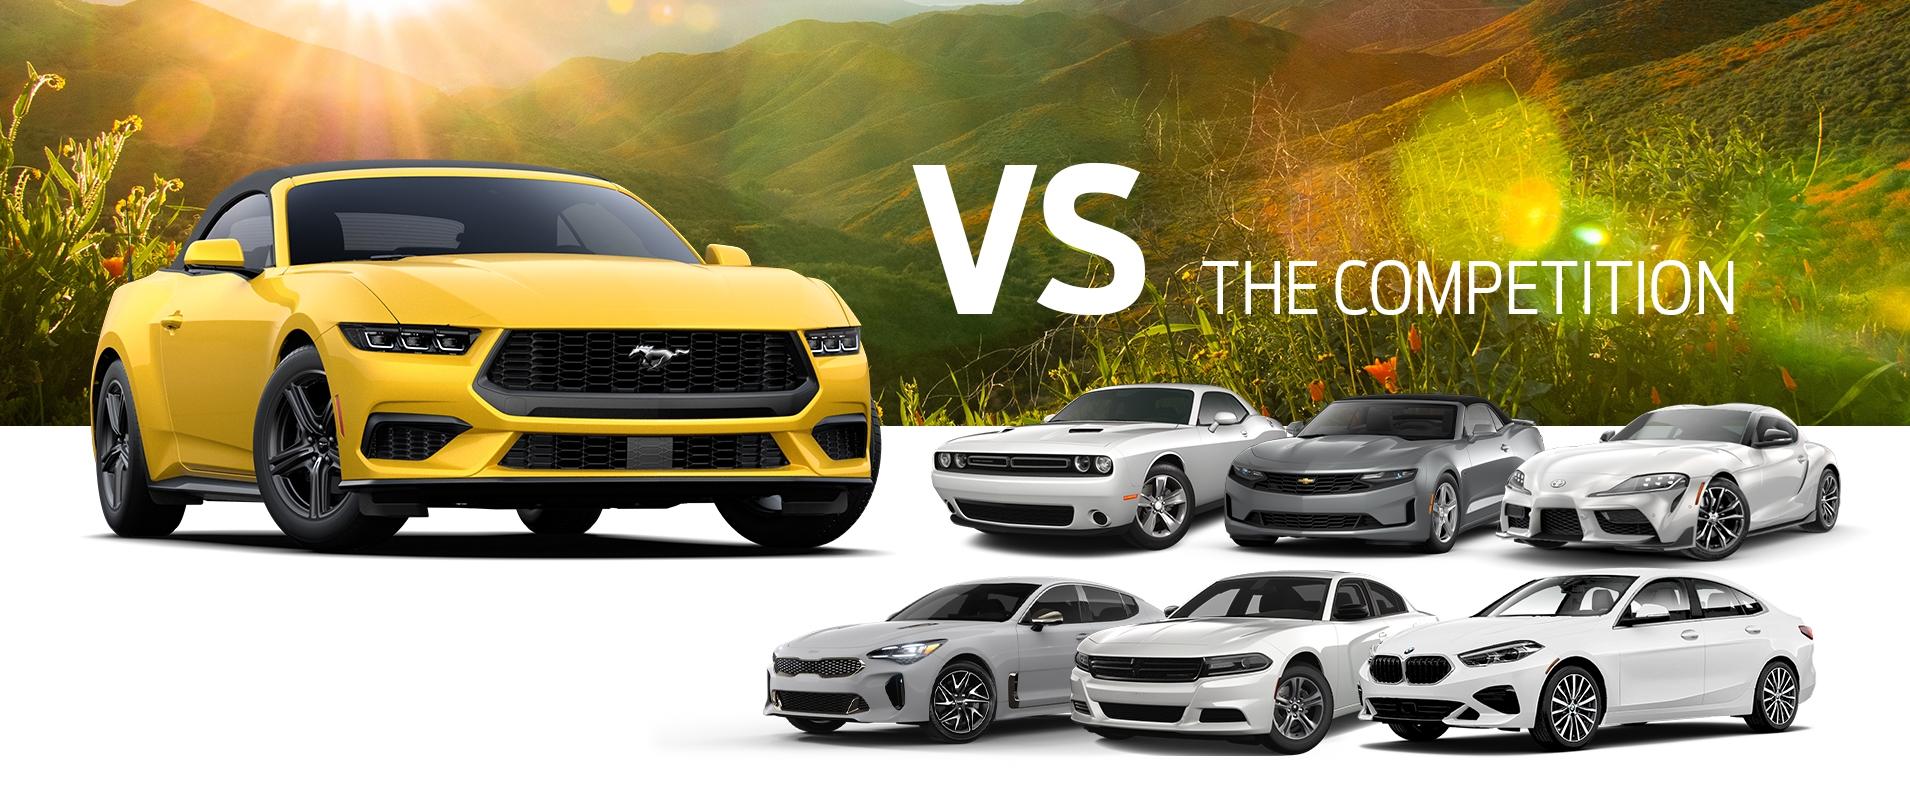 Mustang vs Competition